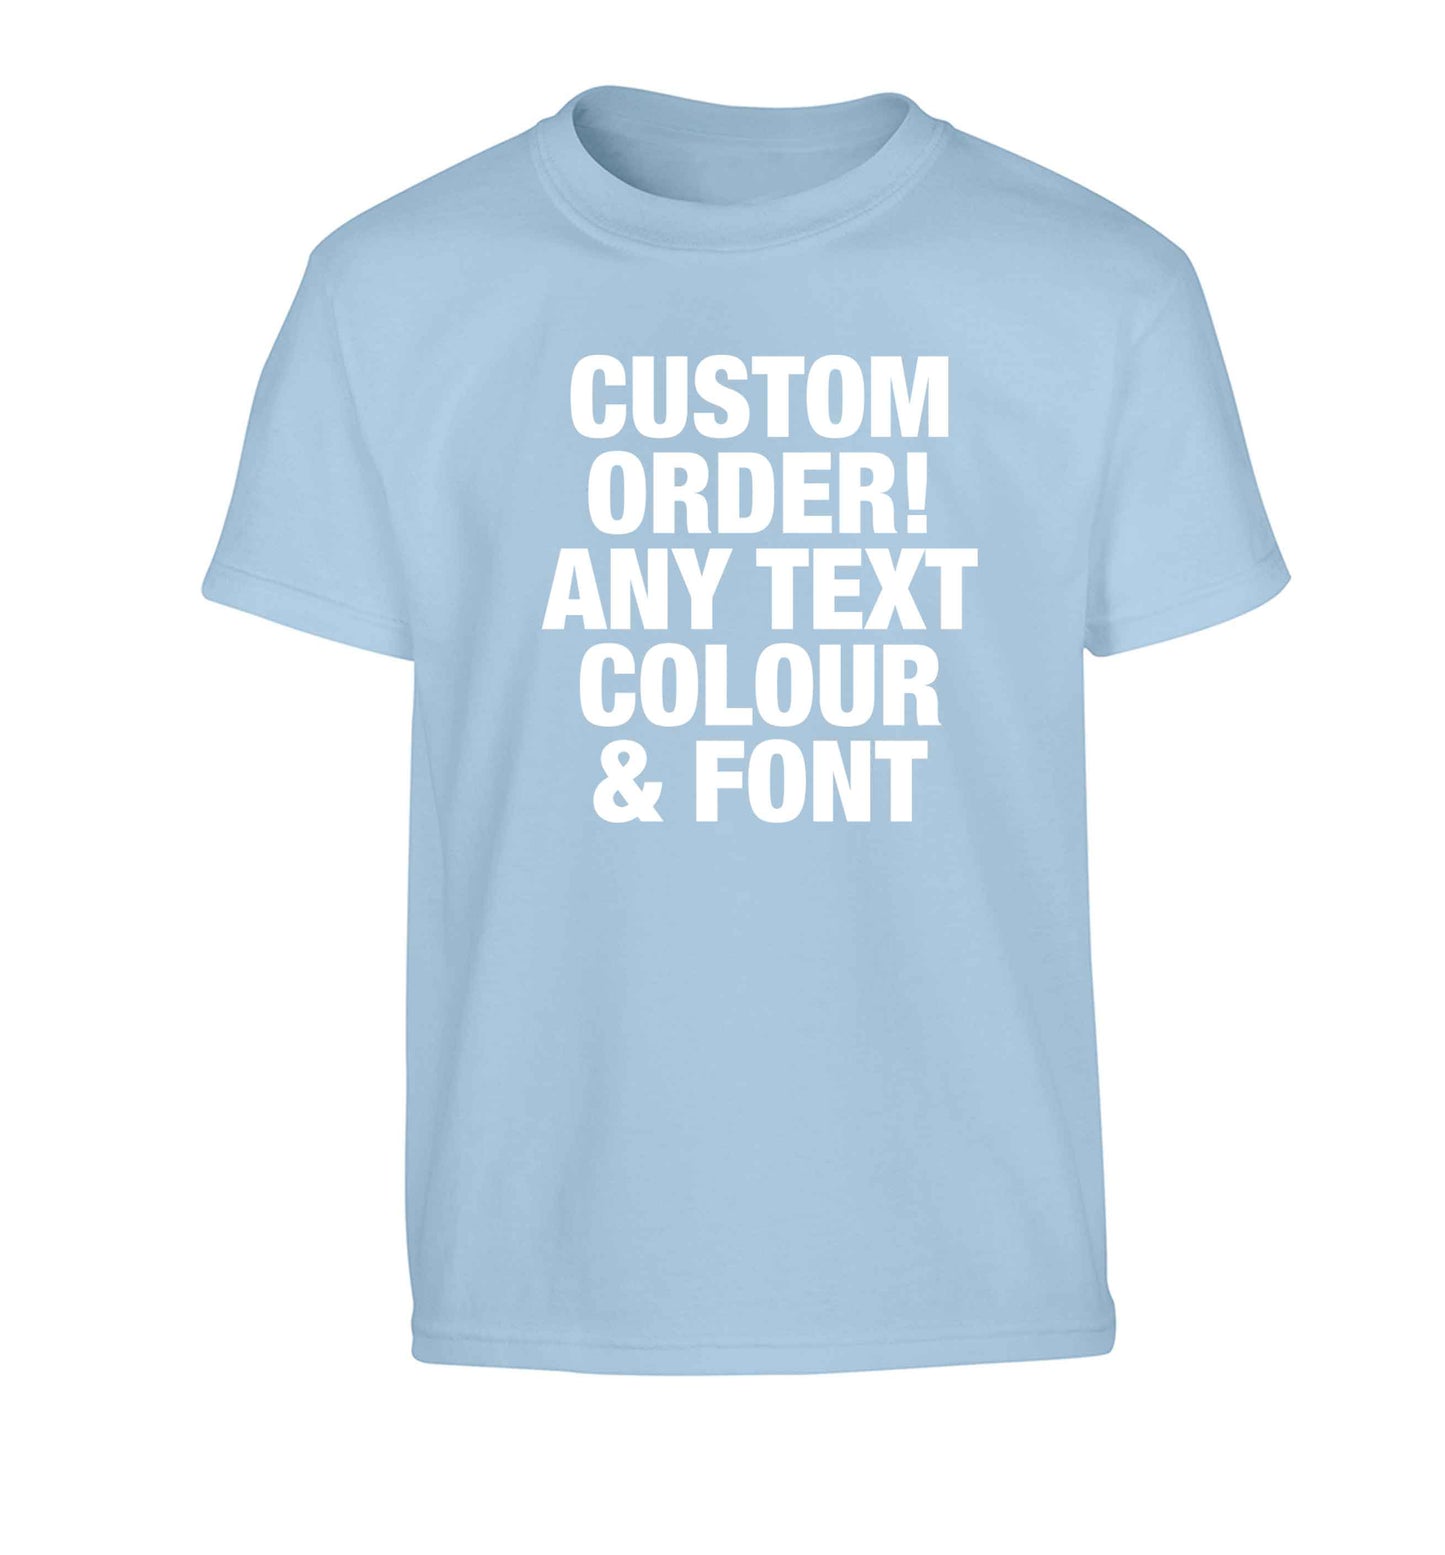 Custom order any text colour and font Children's light blue Tshirt 12-13 Years